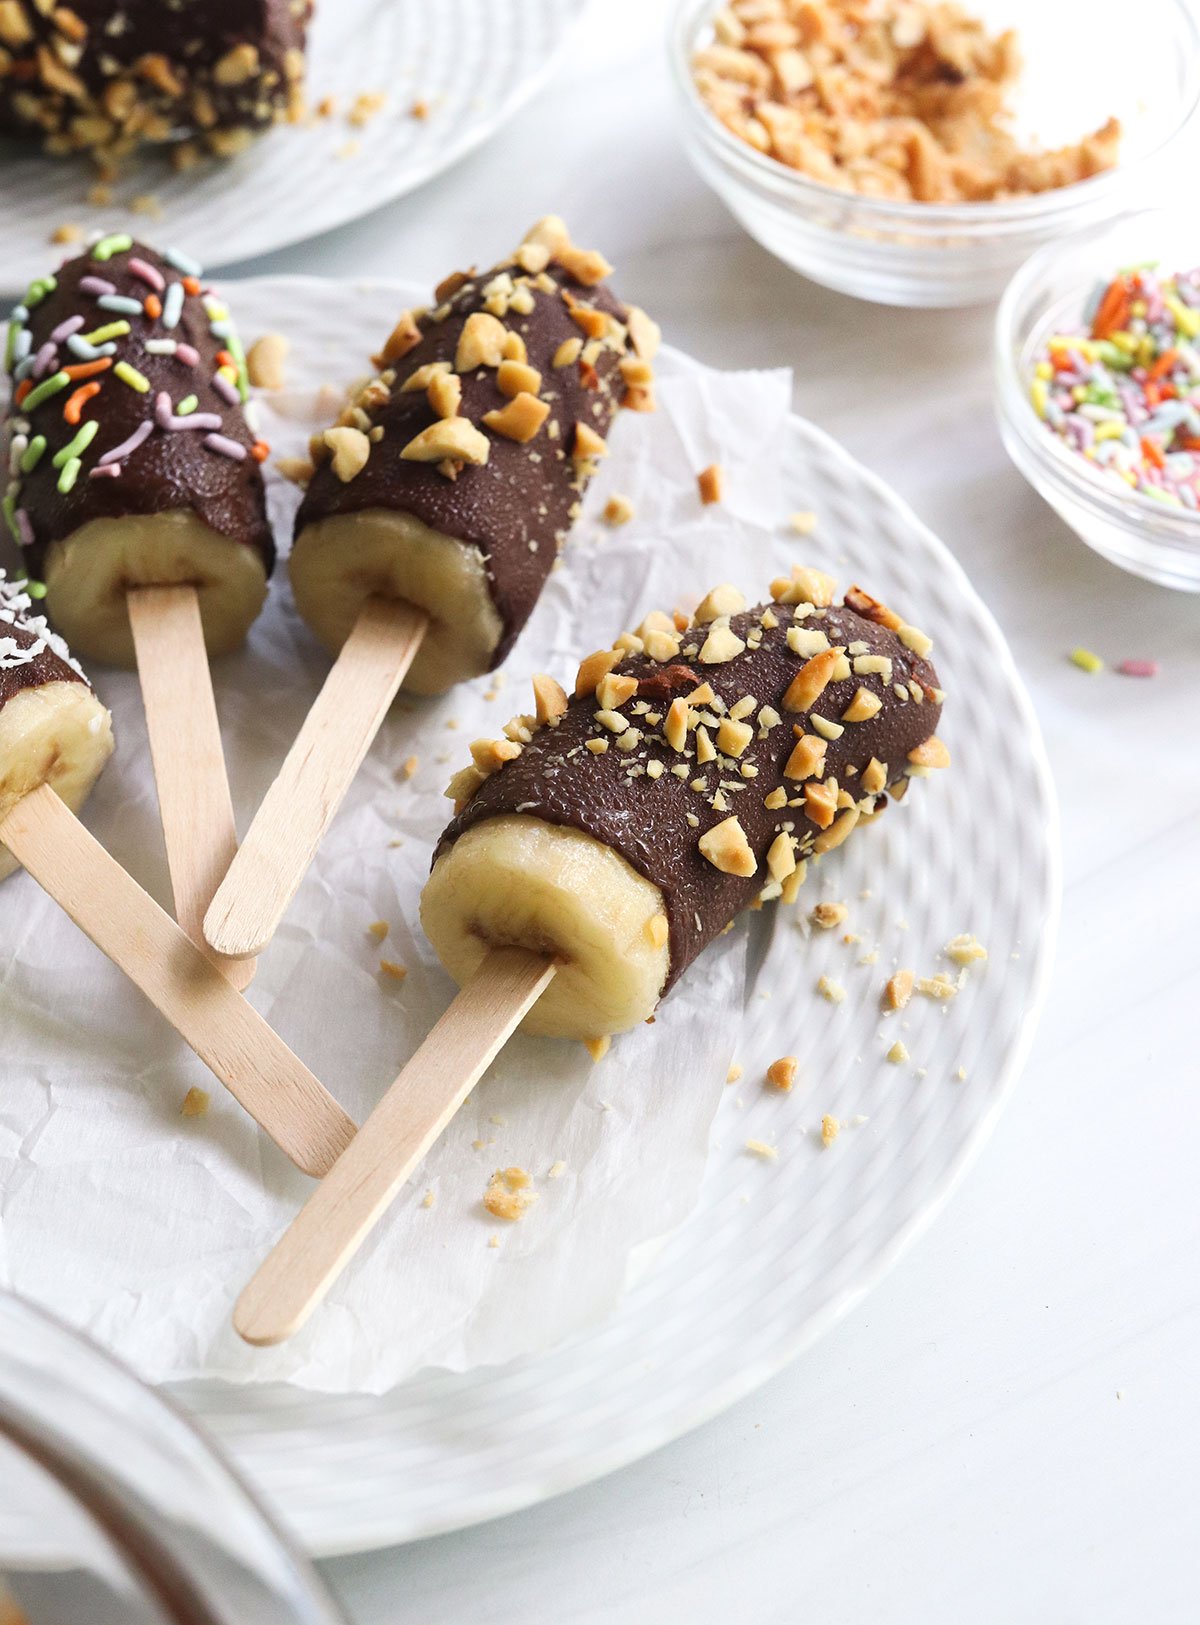 chocolate banana coated in peanuts and sprinkles on a white plate.